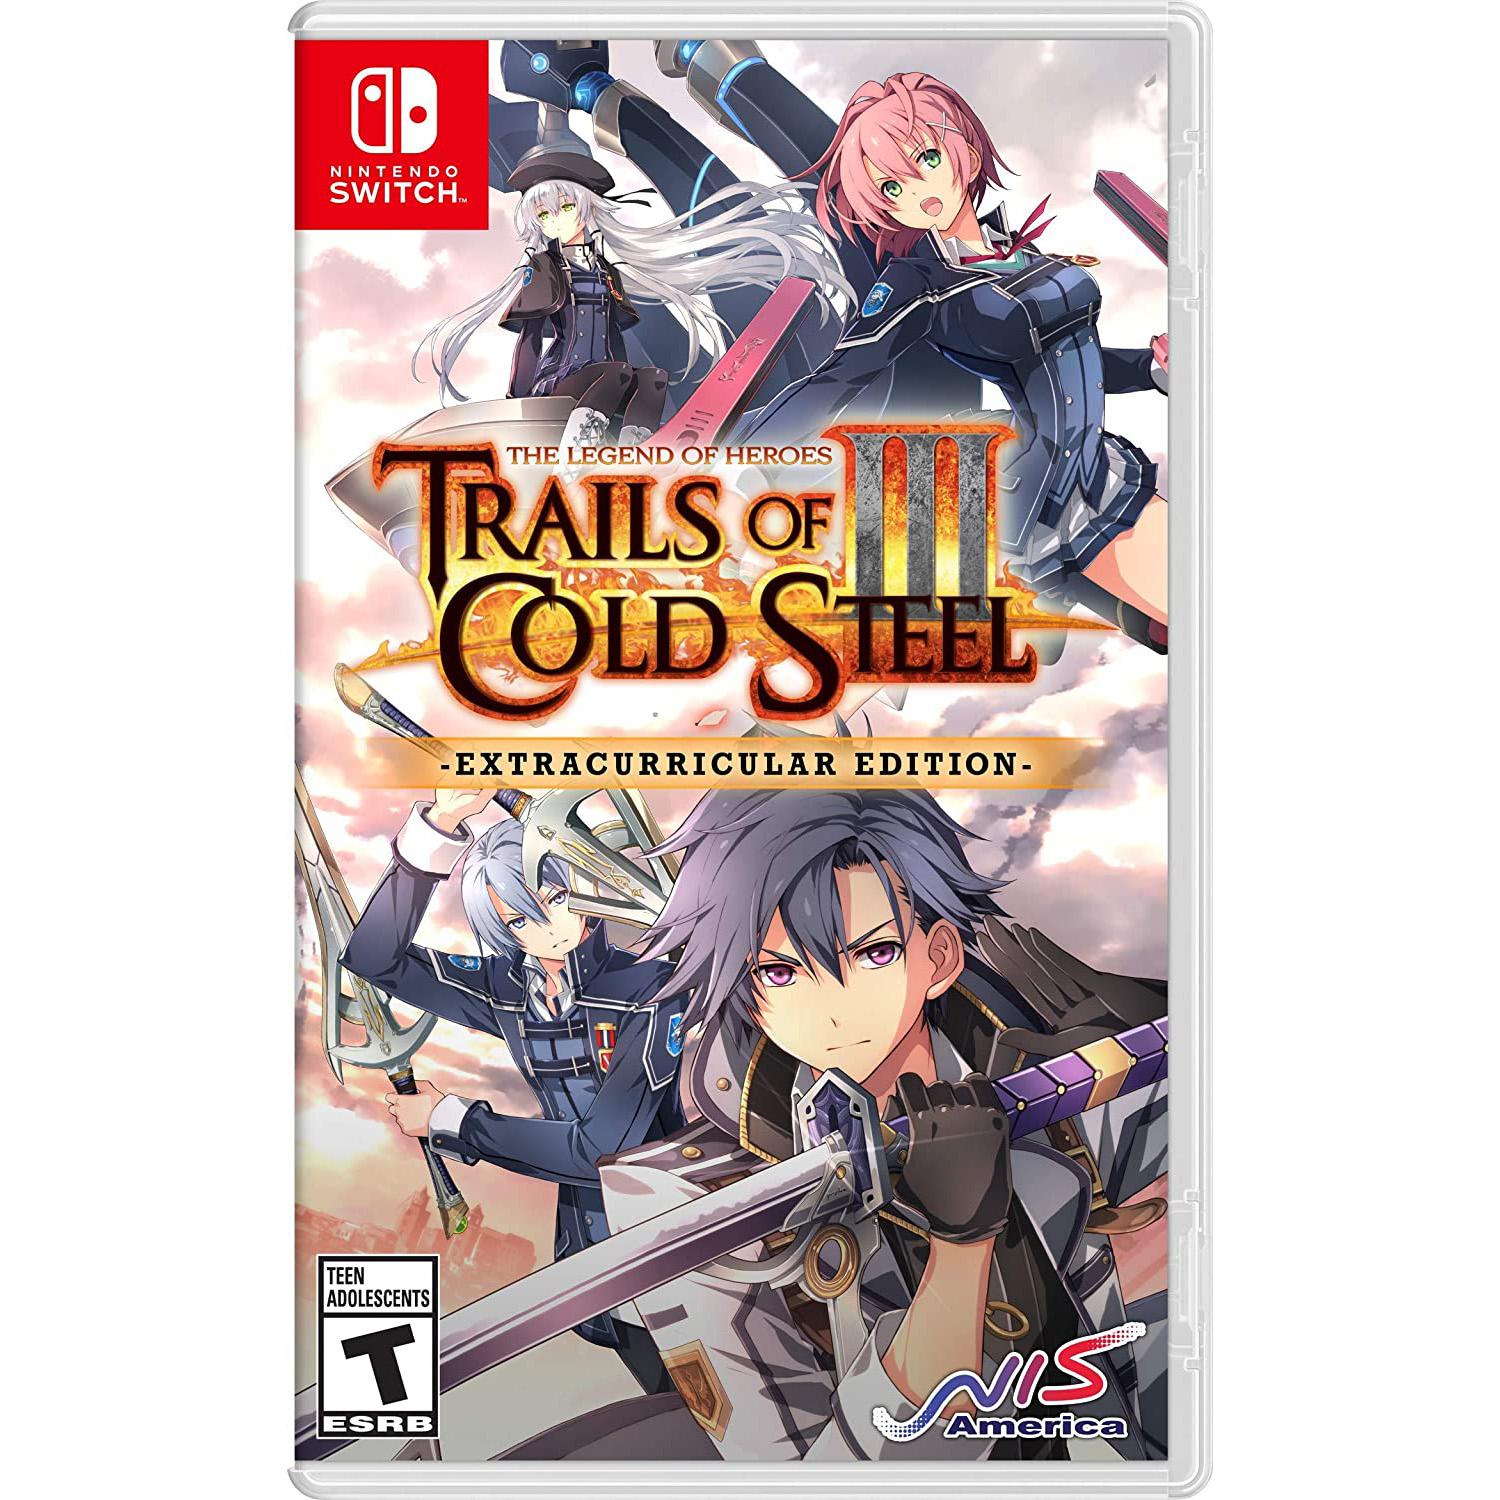 The Legend of Heroes Trails of Cold Steel III Nintendo Switch for $41.99 Shipped